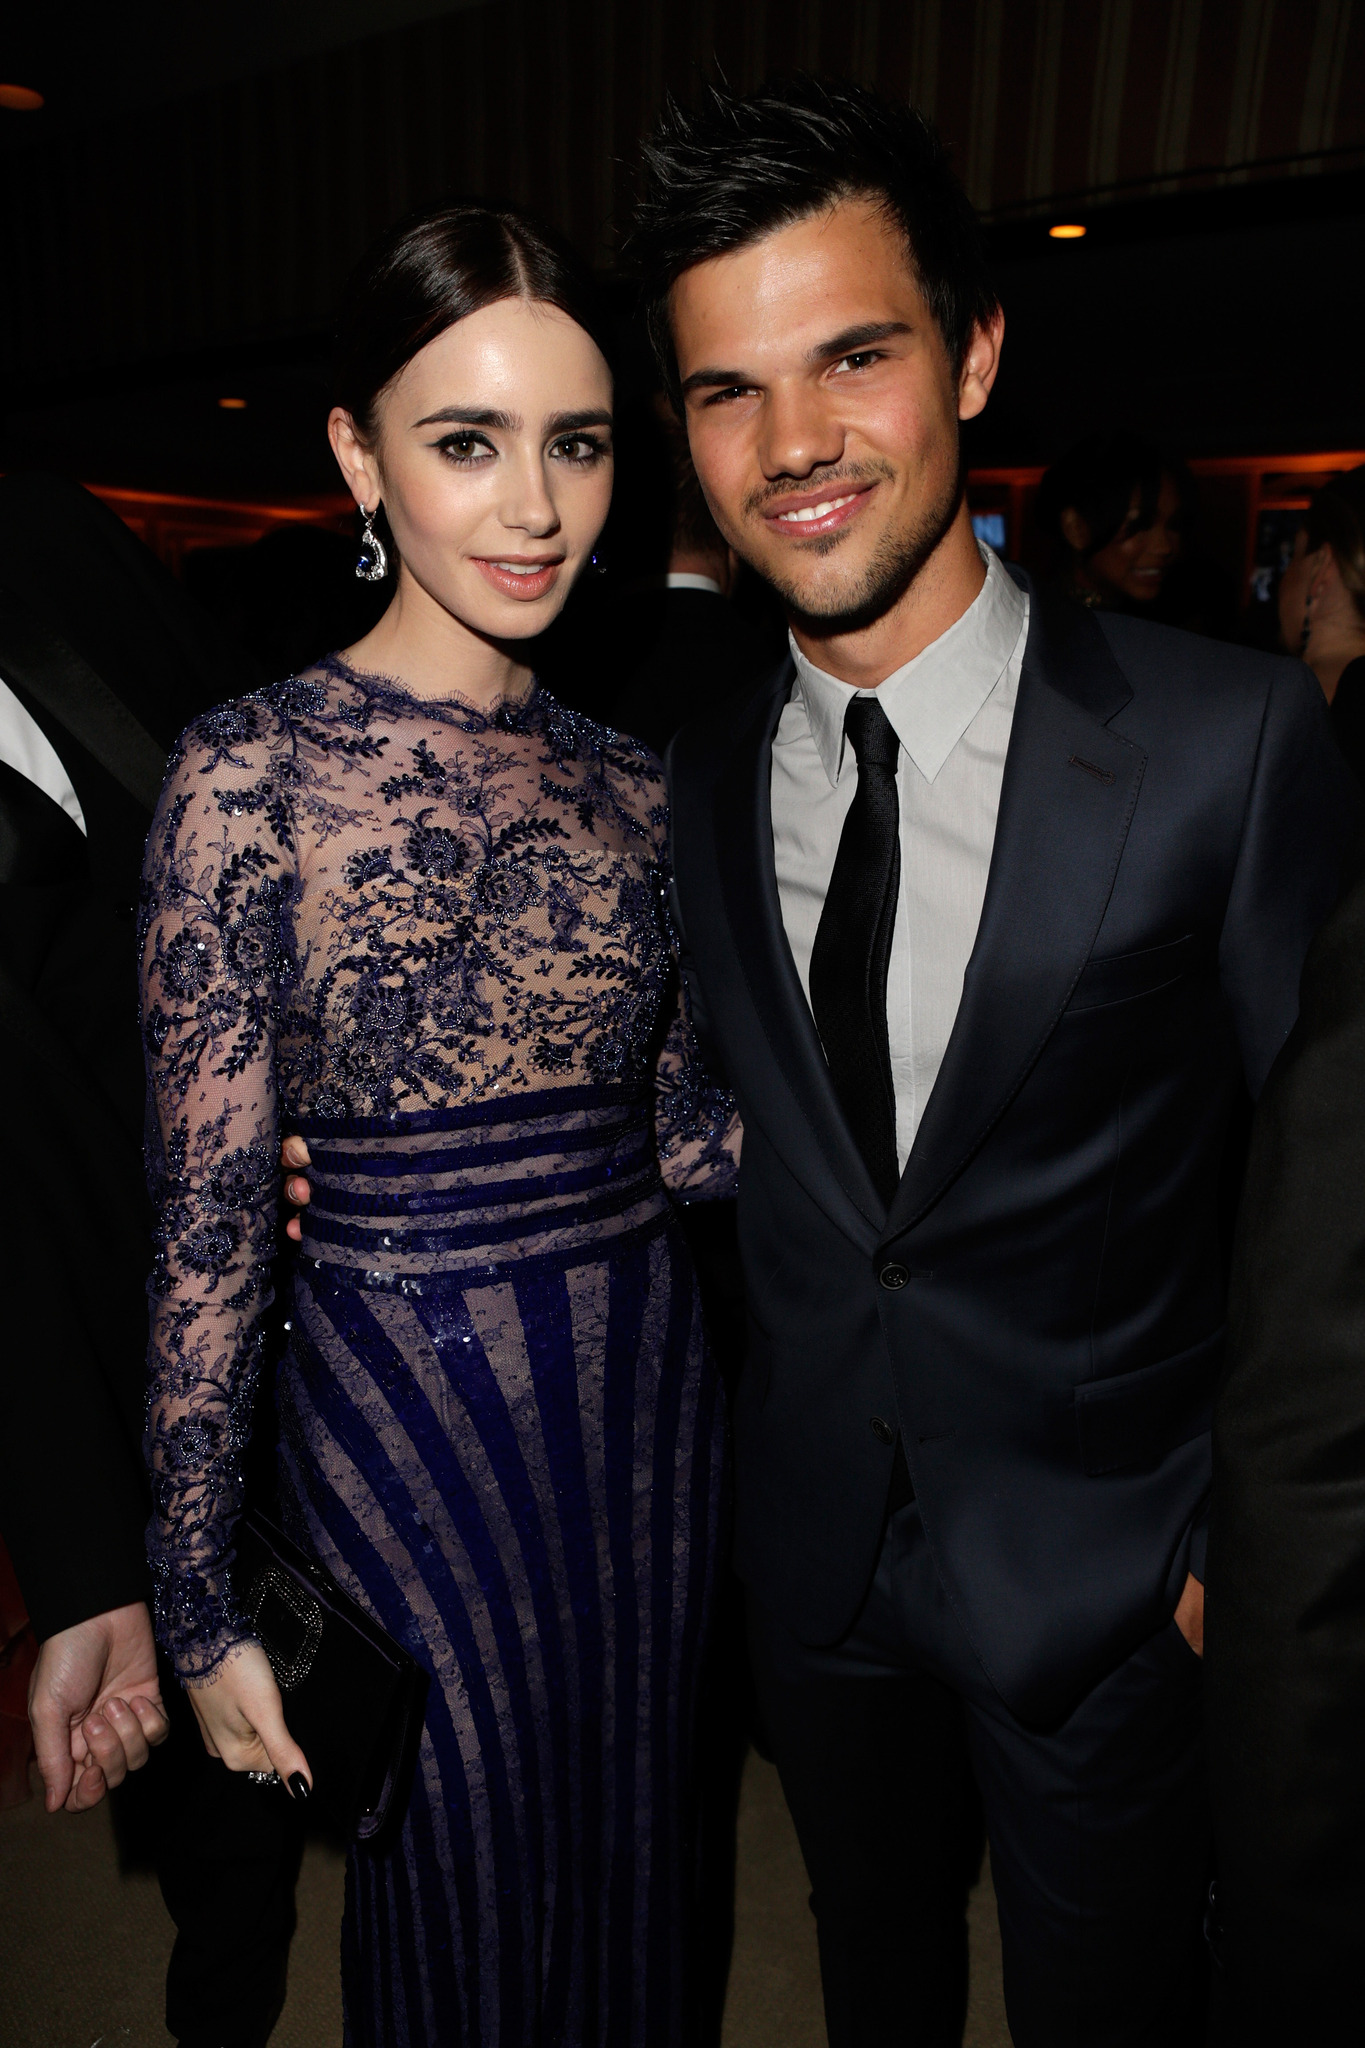 Taylor Lautner and Lily Collins